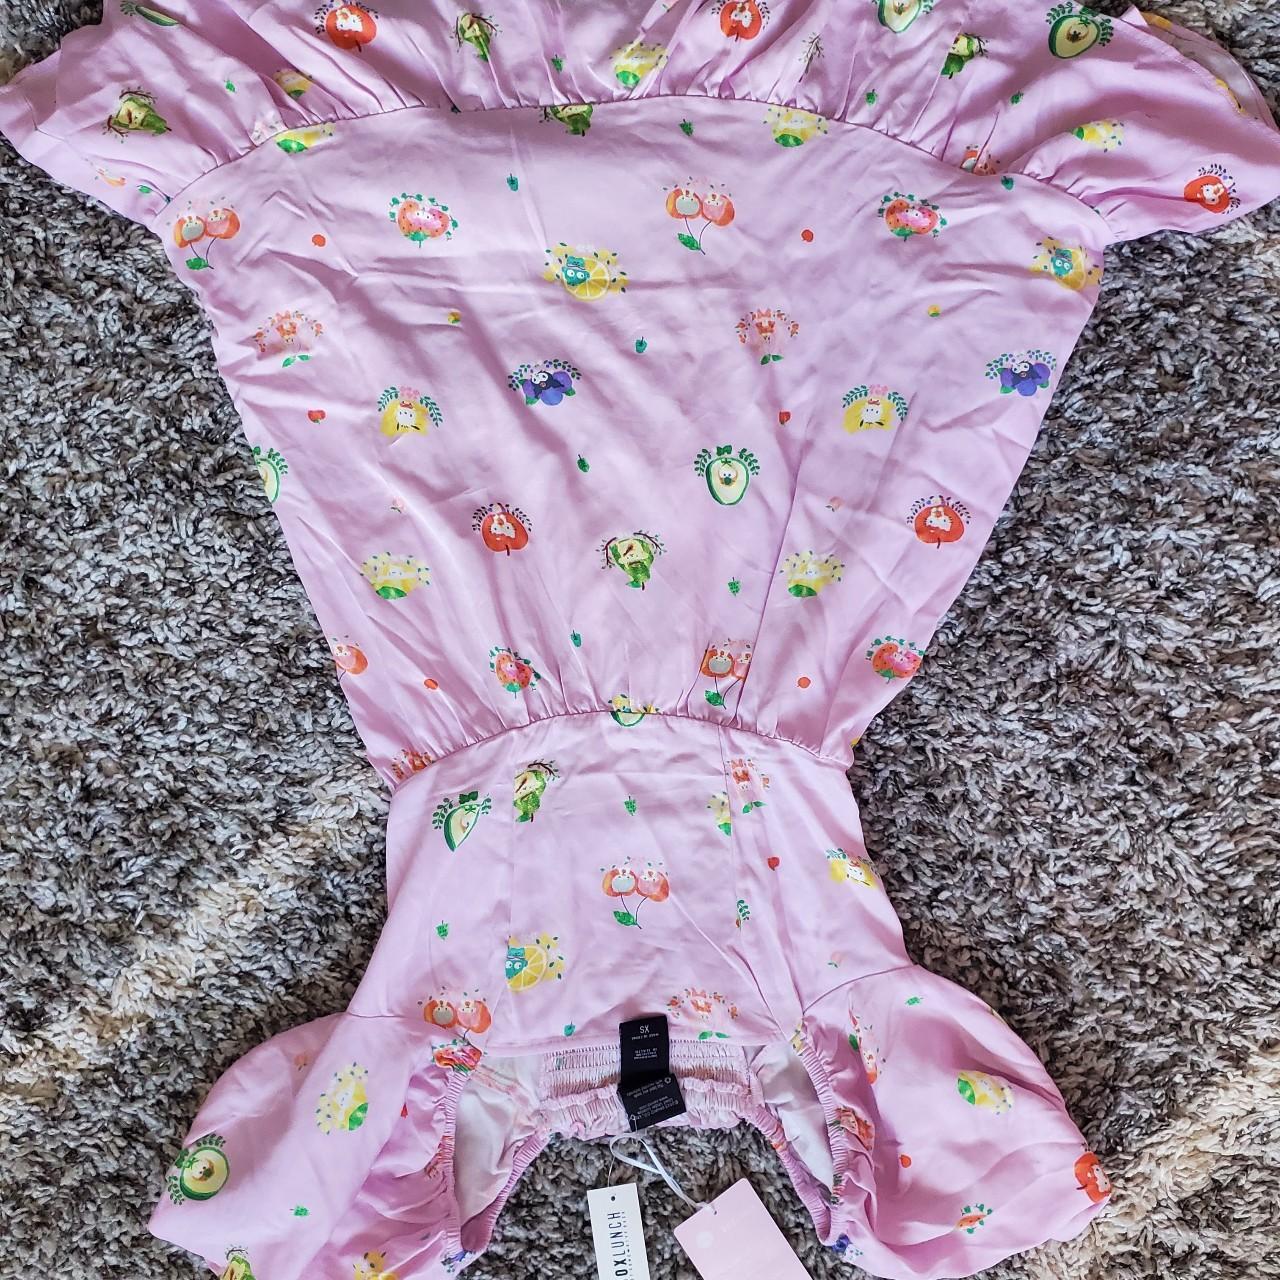 Sanrio fruits Hello Kitty dress from Box Lunch, size... - Depop